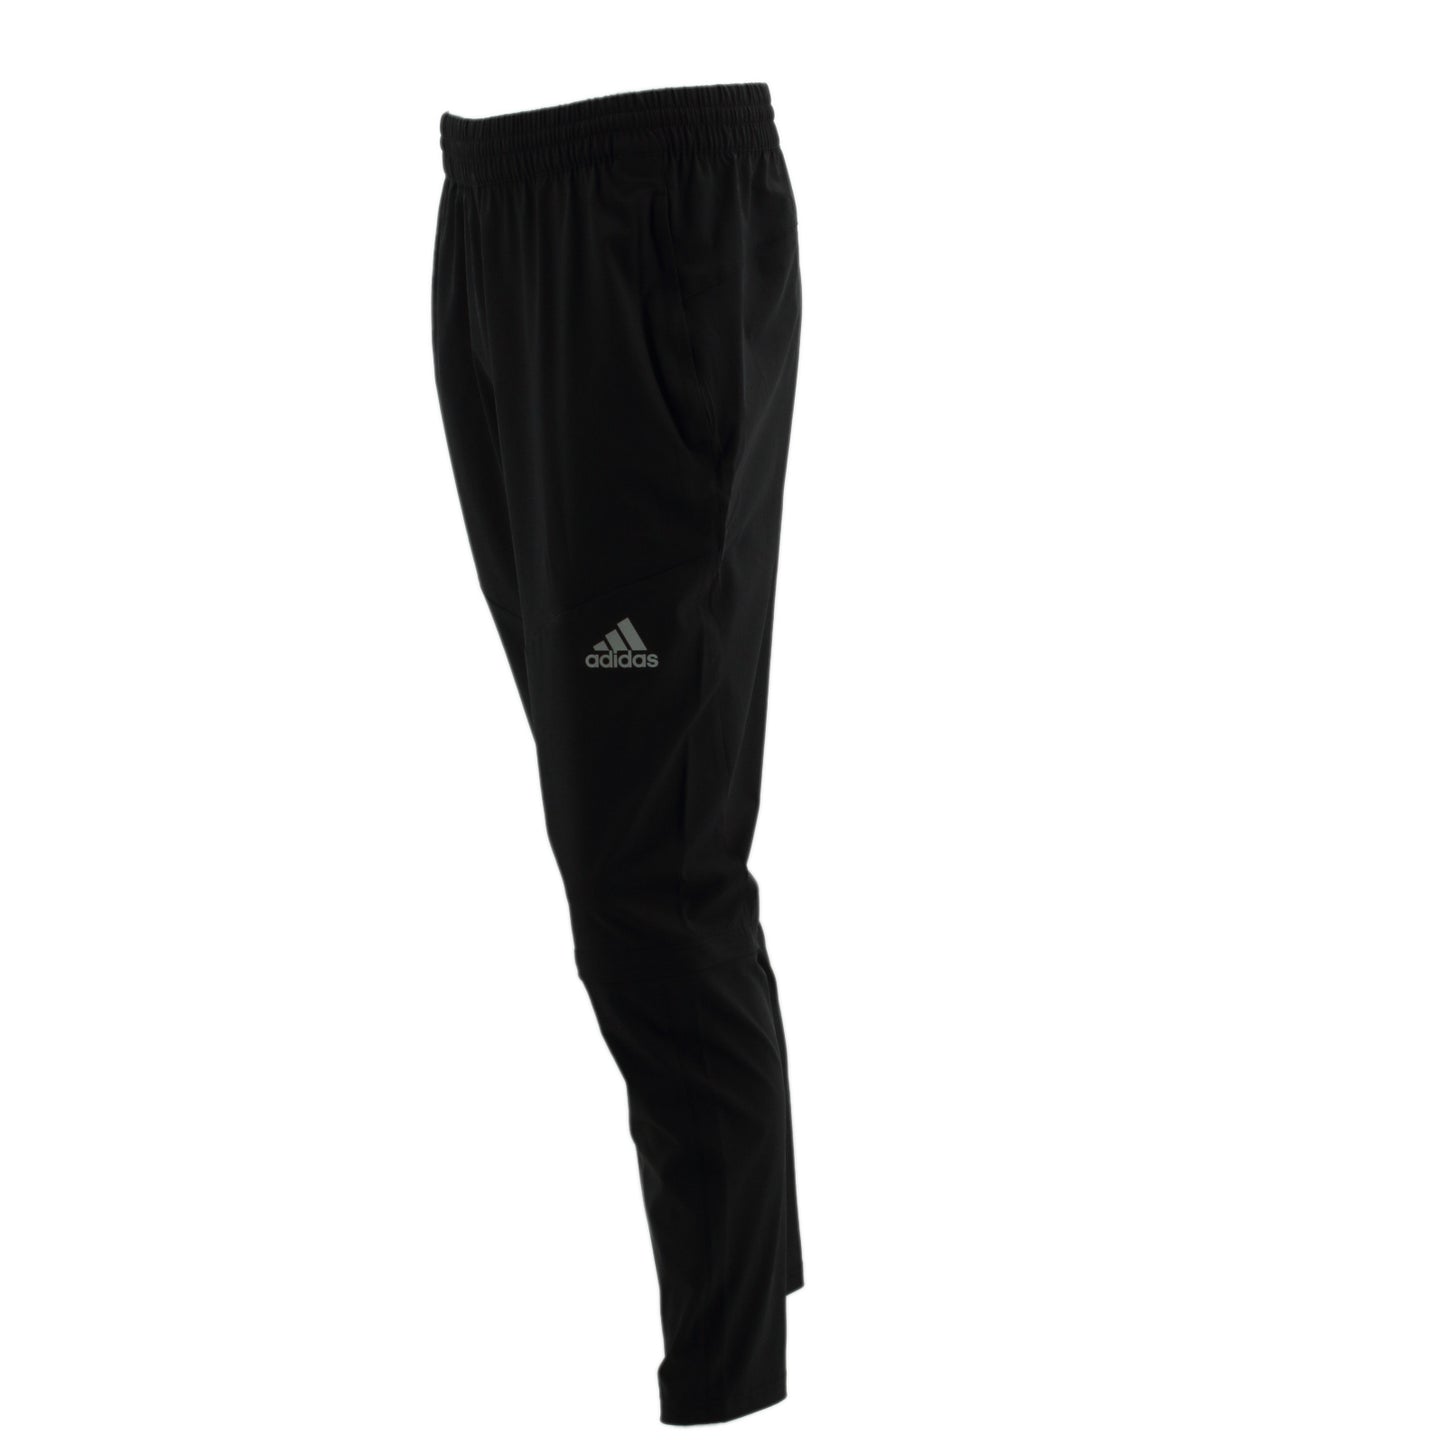 Adidas WOVEN 2in1 Stretch Climalite Pant Trainingshose Herren Sporthose DZ7331 S